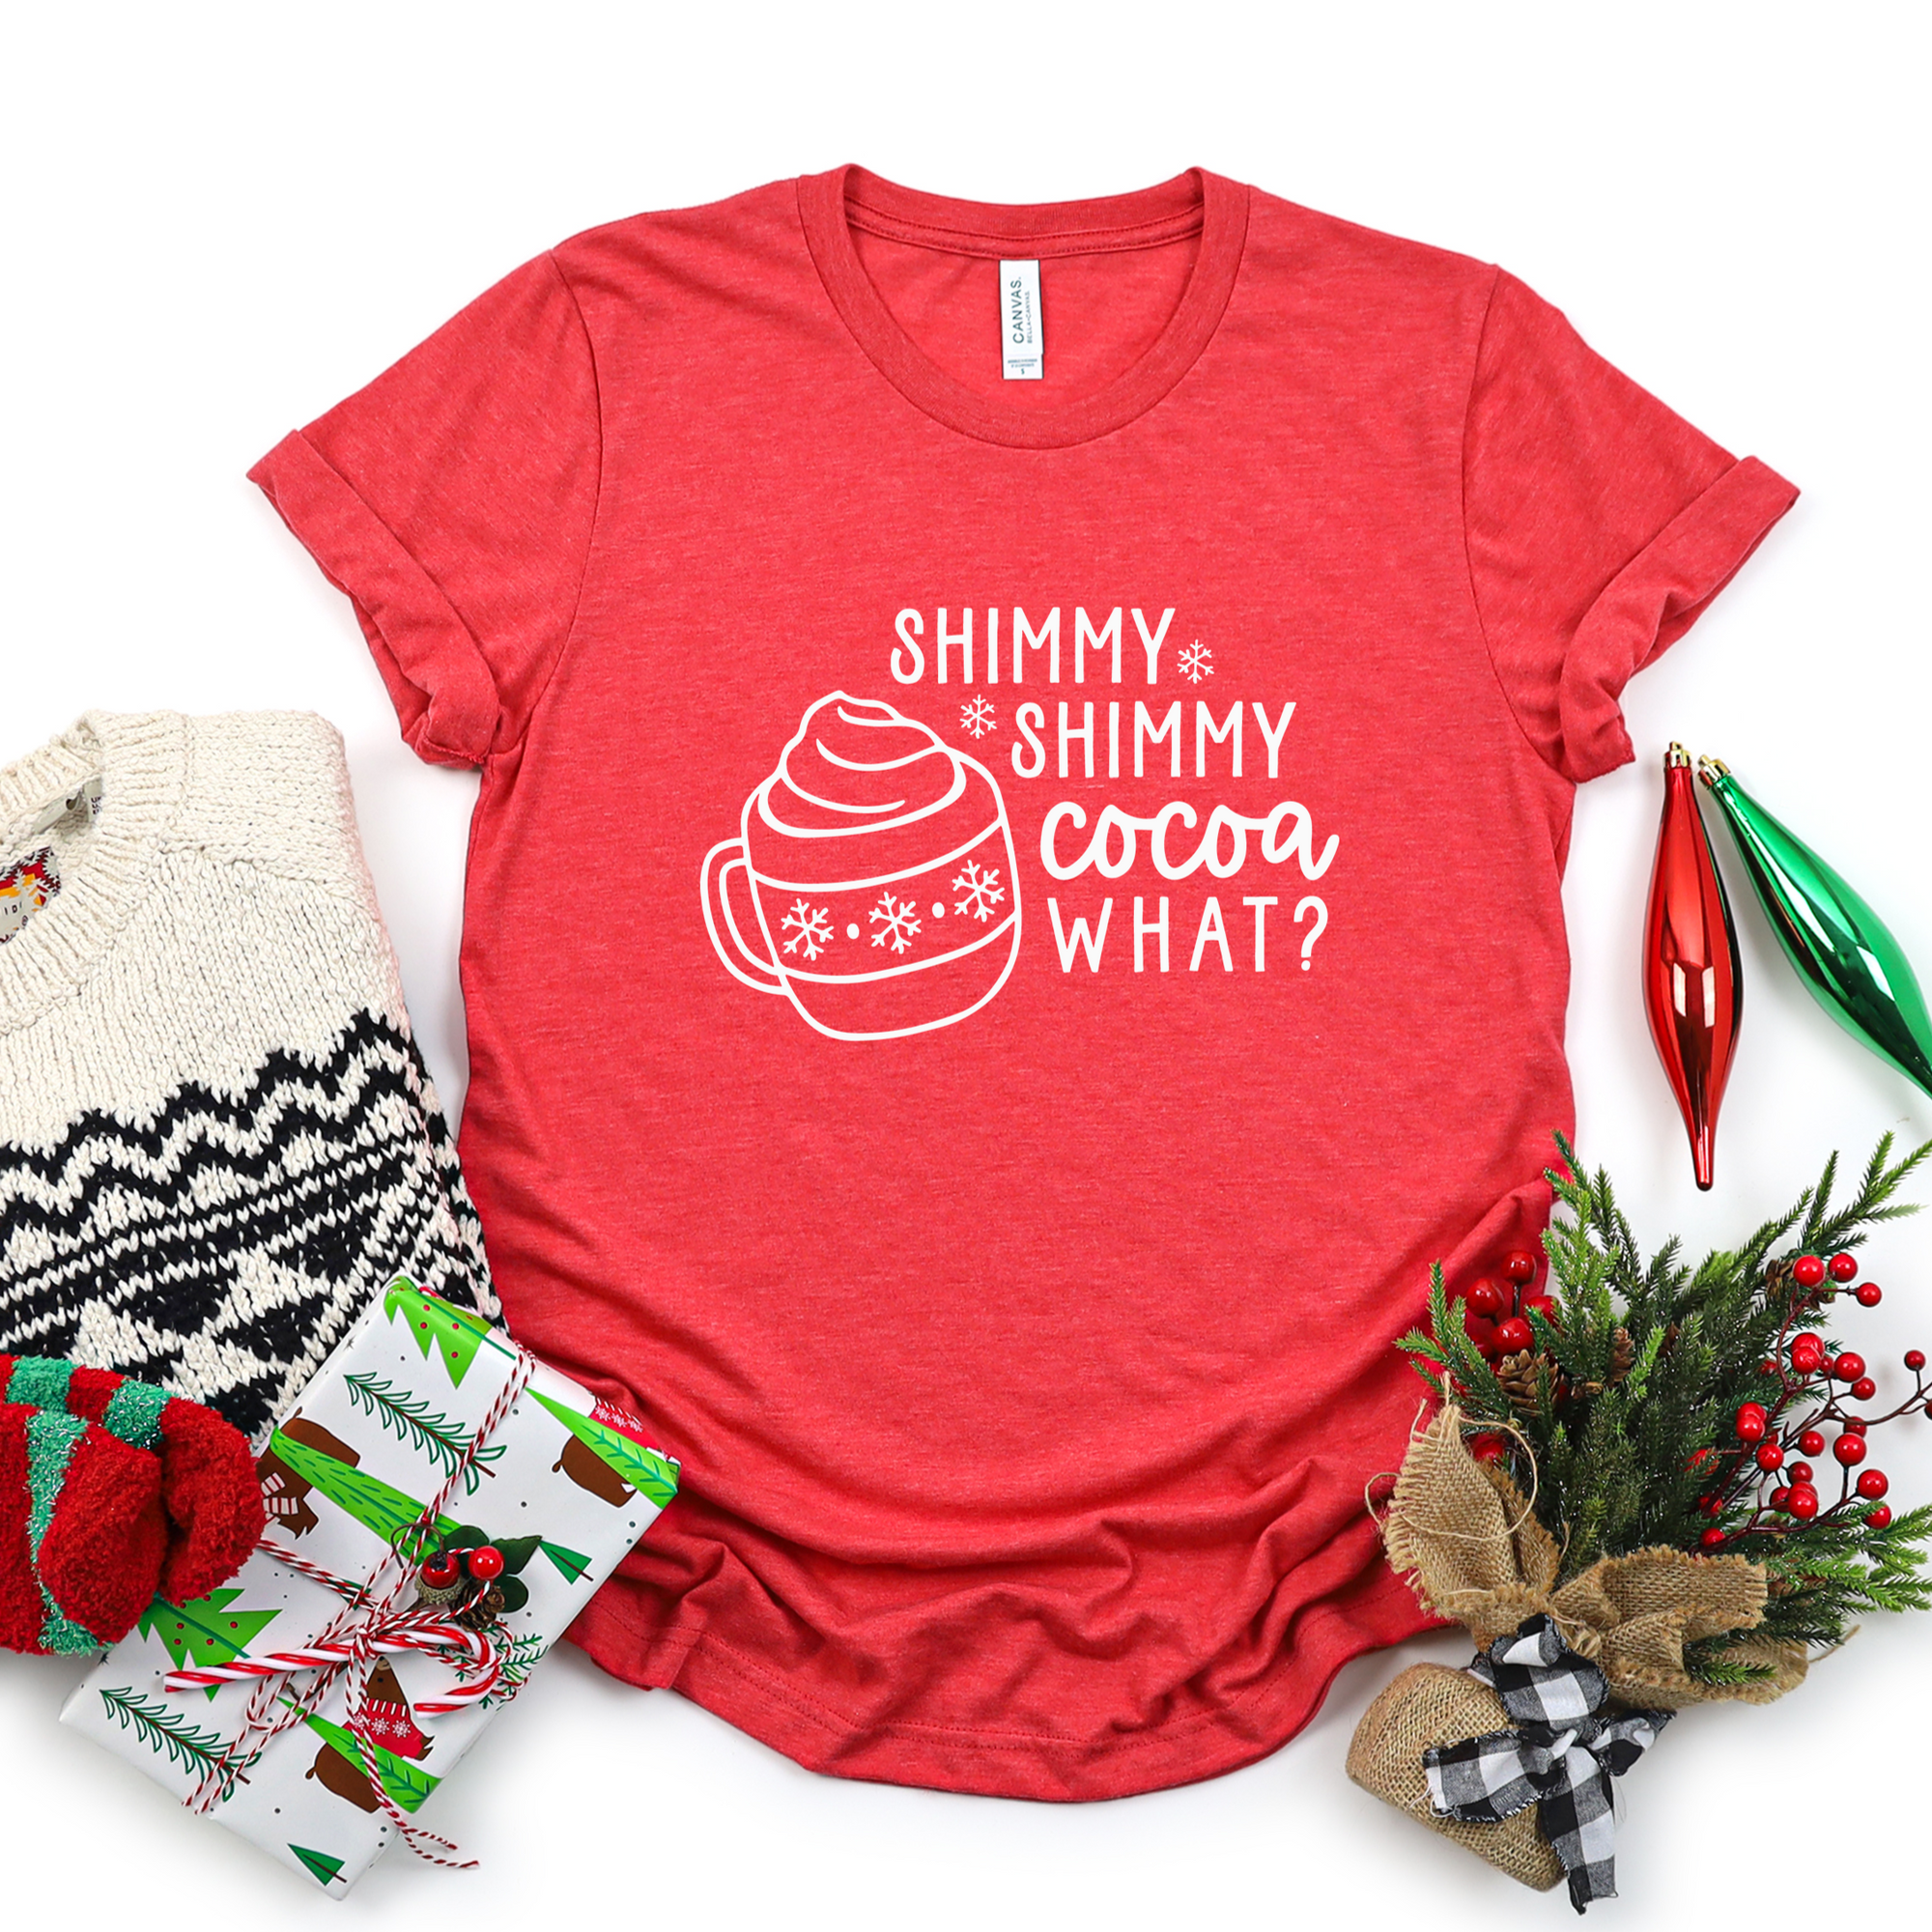 Shimmy Shimmy Cocoa What Tee